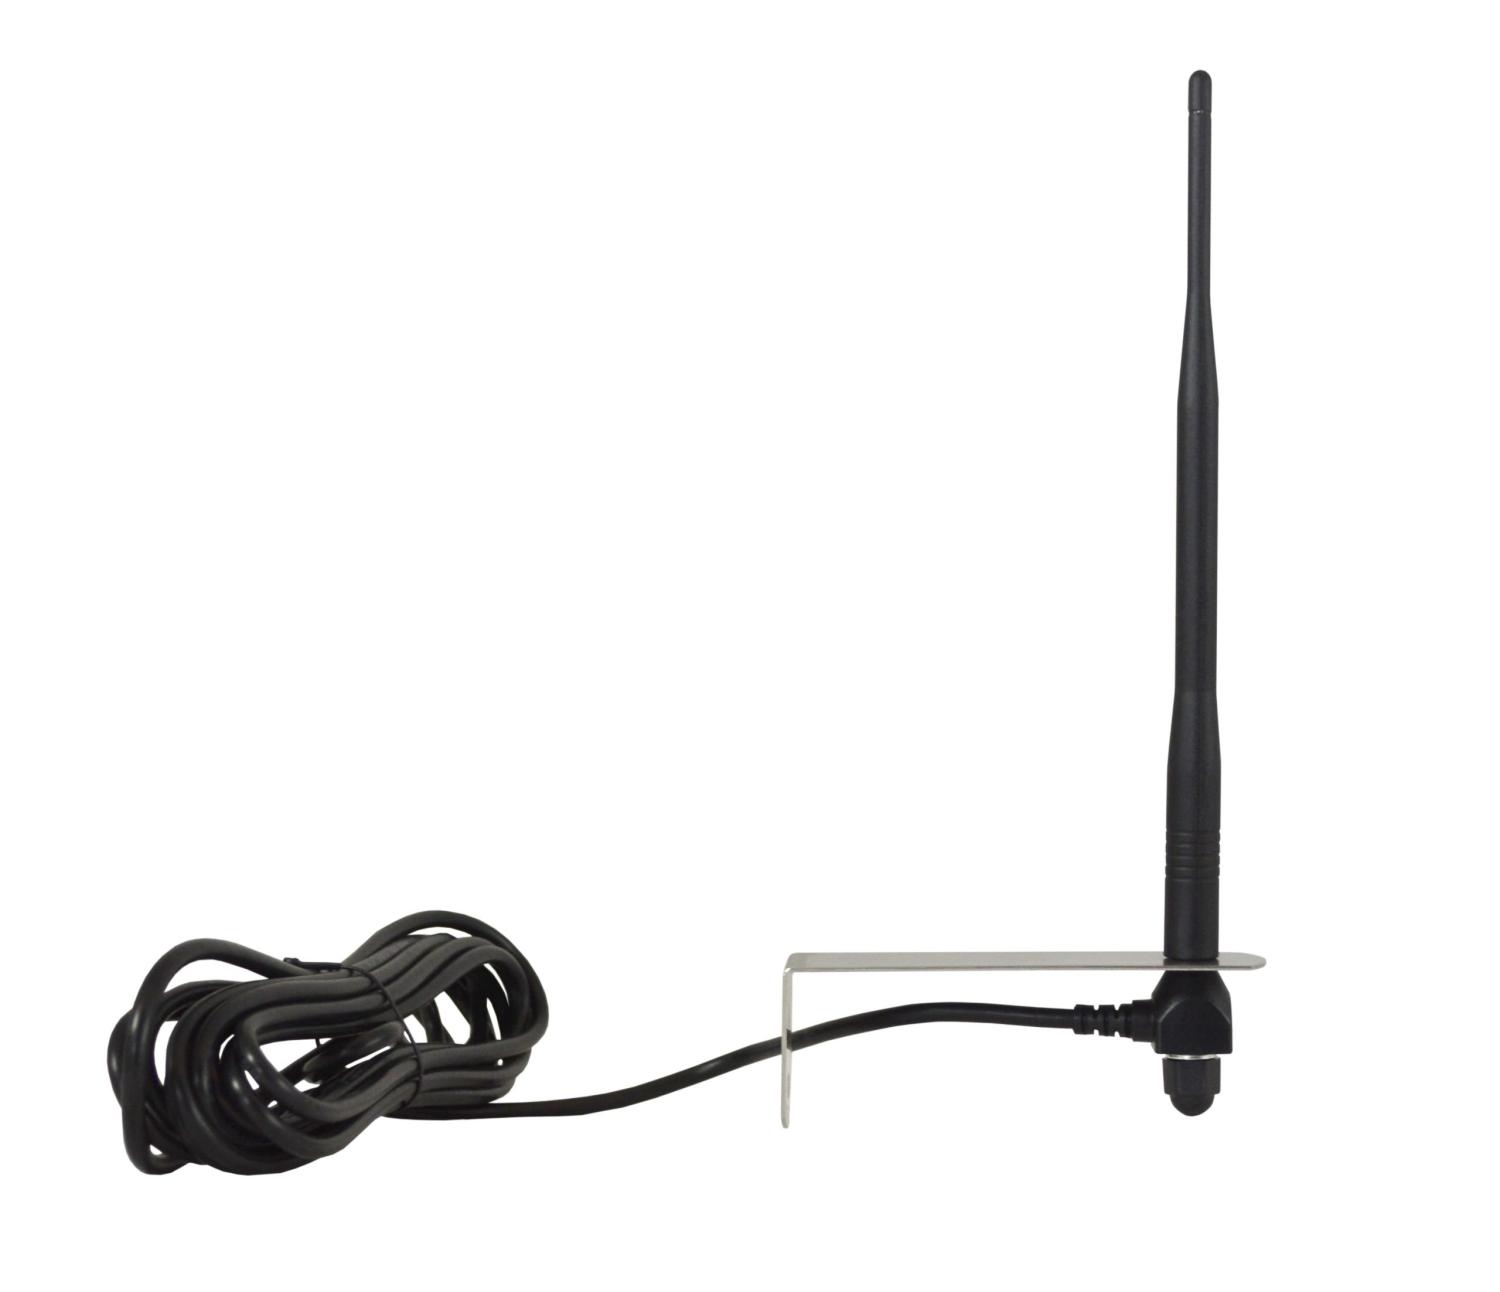 Antenne 433 Mhz - Ref: PANT400 / ANT02